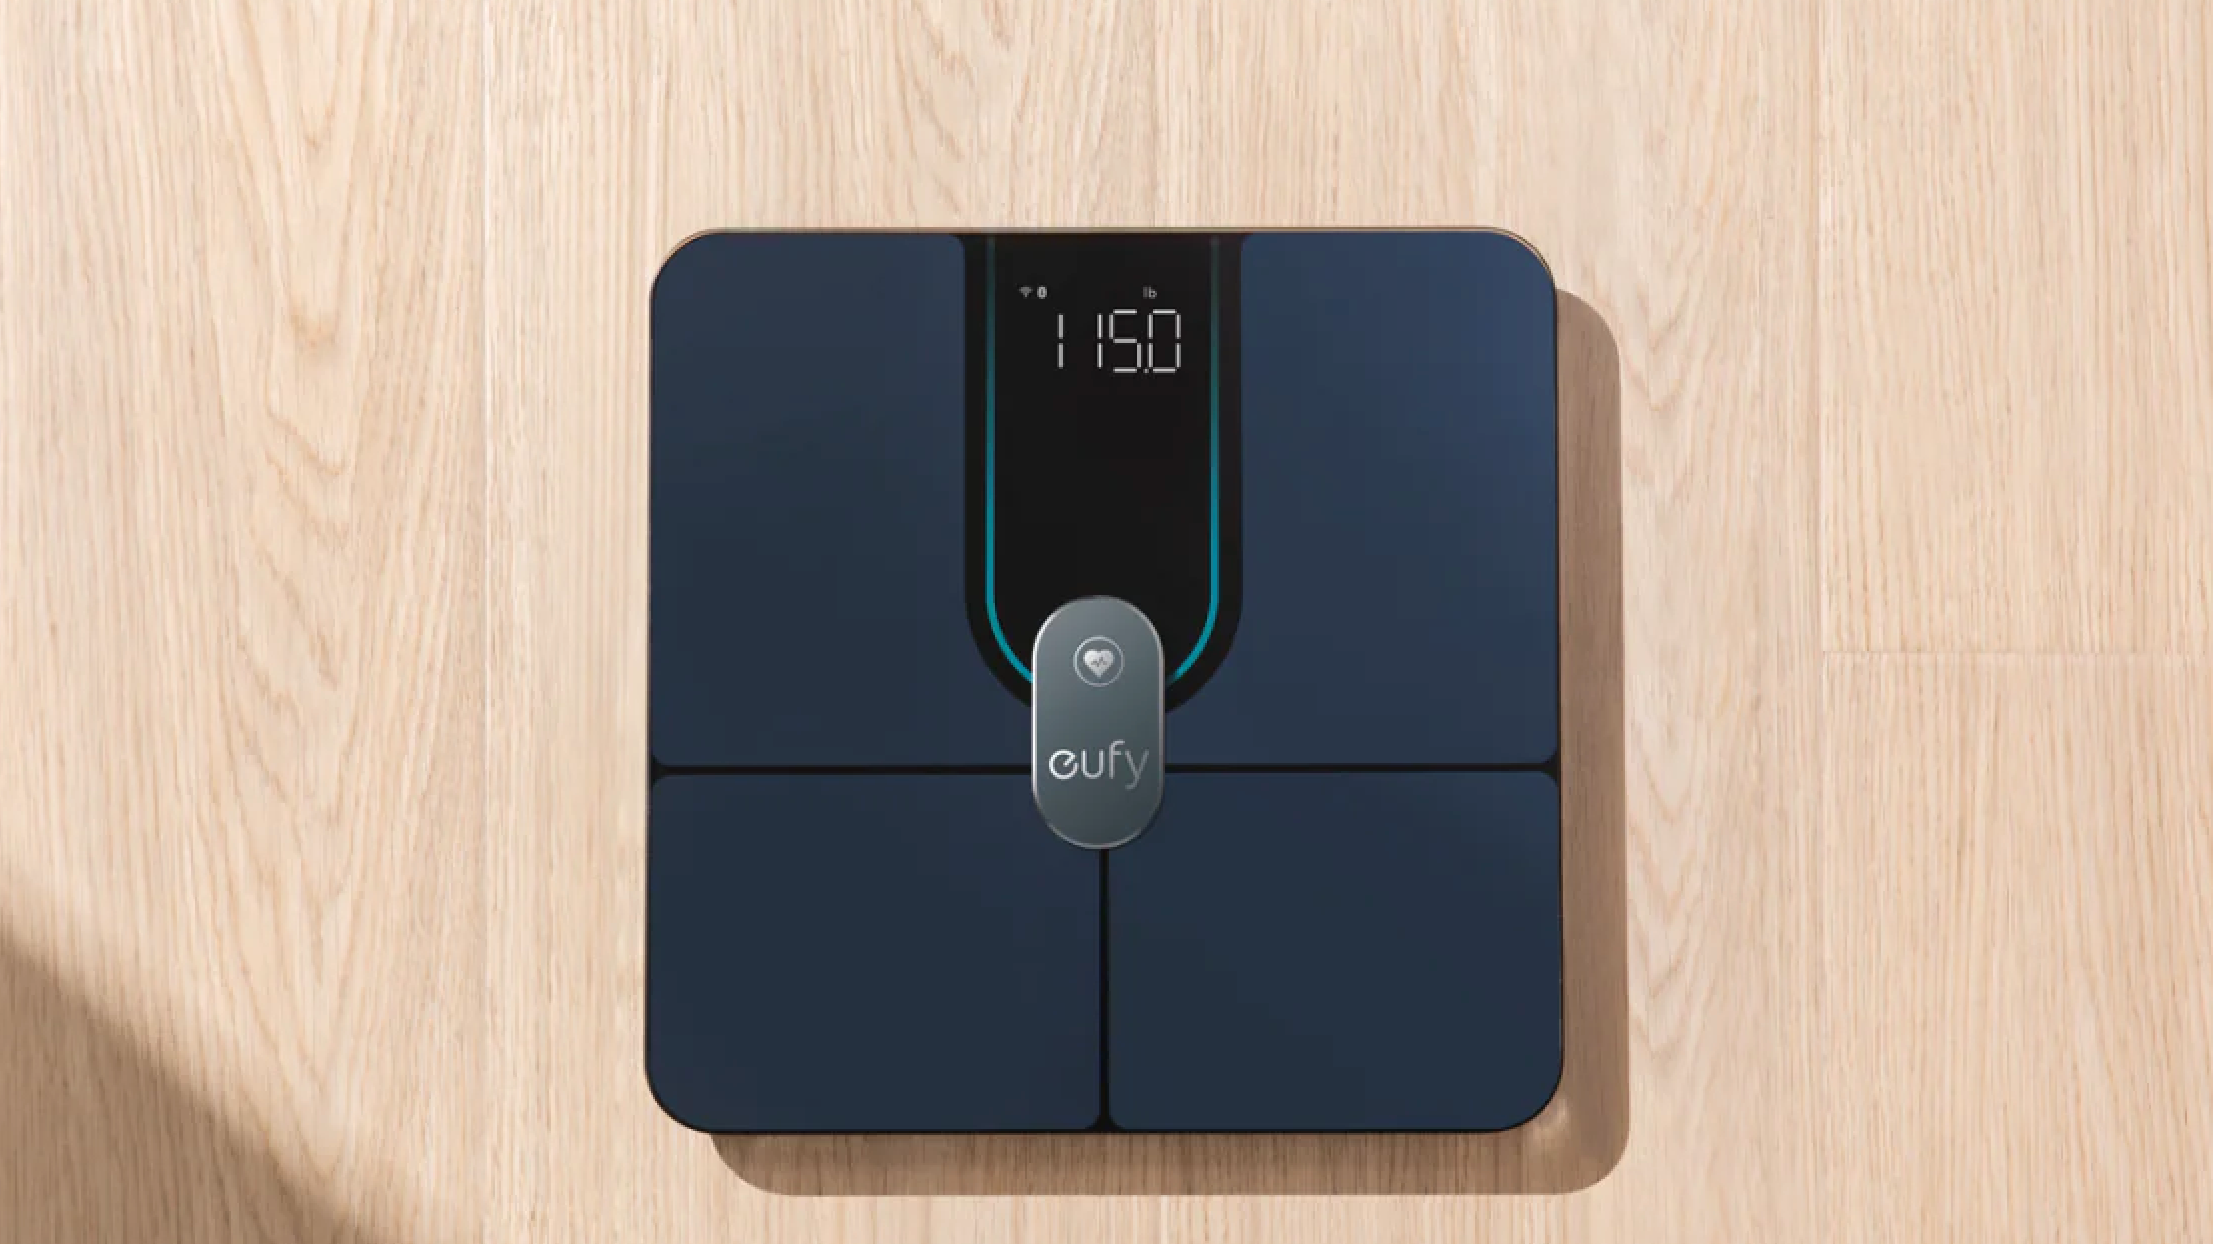 These discounted smart bathroom scales are less than $50 right now